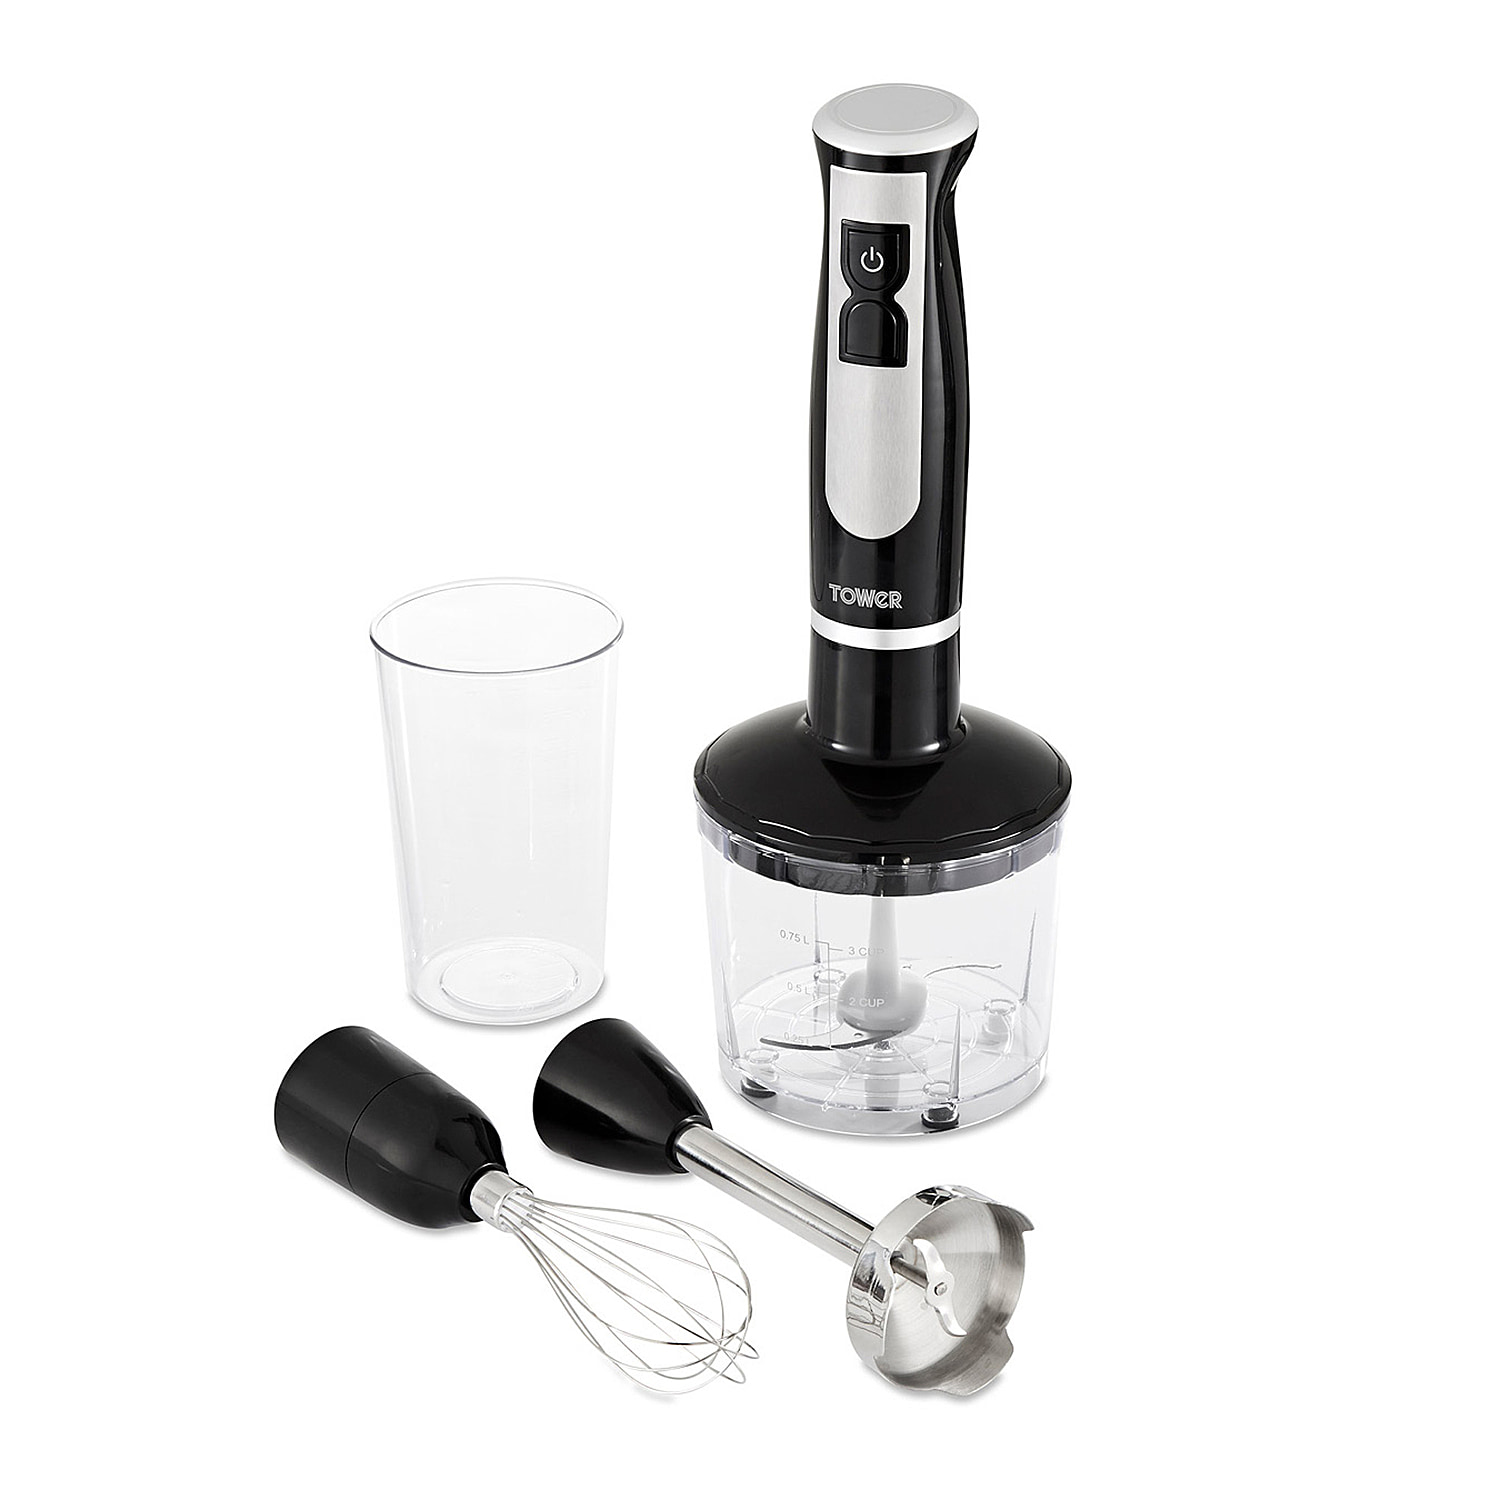 Tower-4-in-1-Multi-Use-Hand-Blender-with-Stainless-Steel-Blades-600W-B